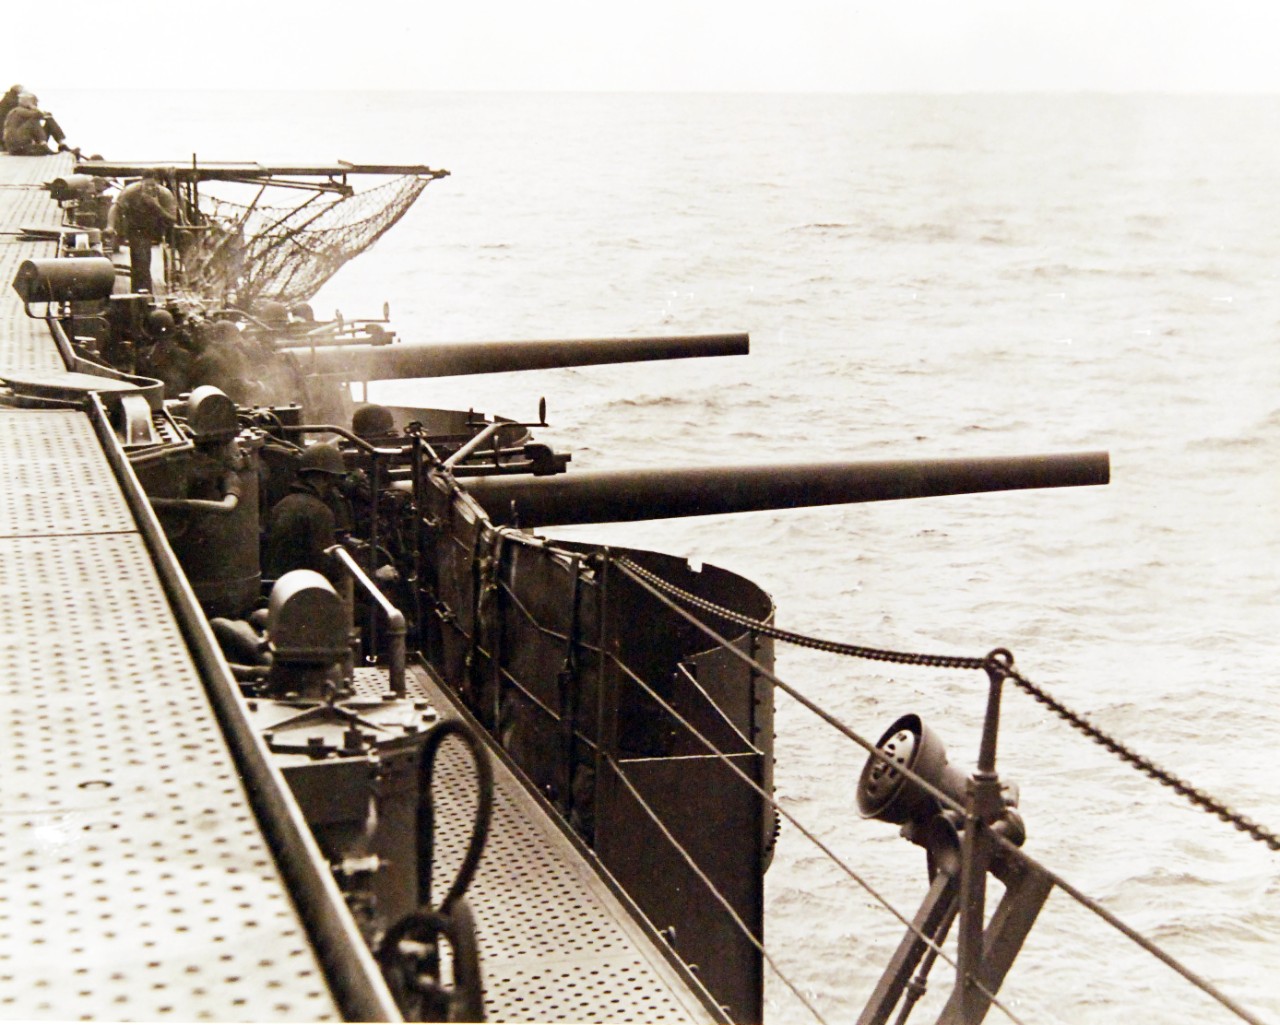 80-G-16954:  USS Enterprise (CV-6), 1942.  5-inch anti-aircraft guns fire at a target drone in a simulated torpedo attack during recent gunnery practice at sea in the Pacific area, March 4, 1942.  U.S. Navy photograph, now in the collections of the U.S. Navy.  (2017/04/11).  